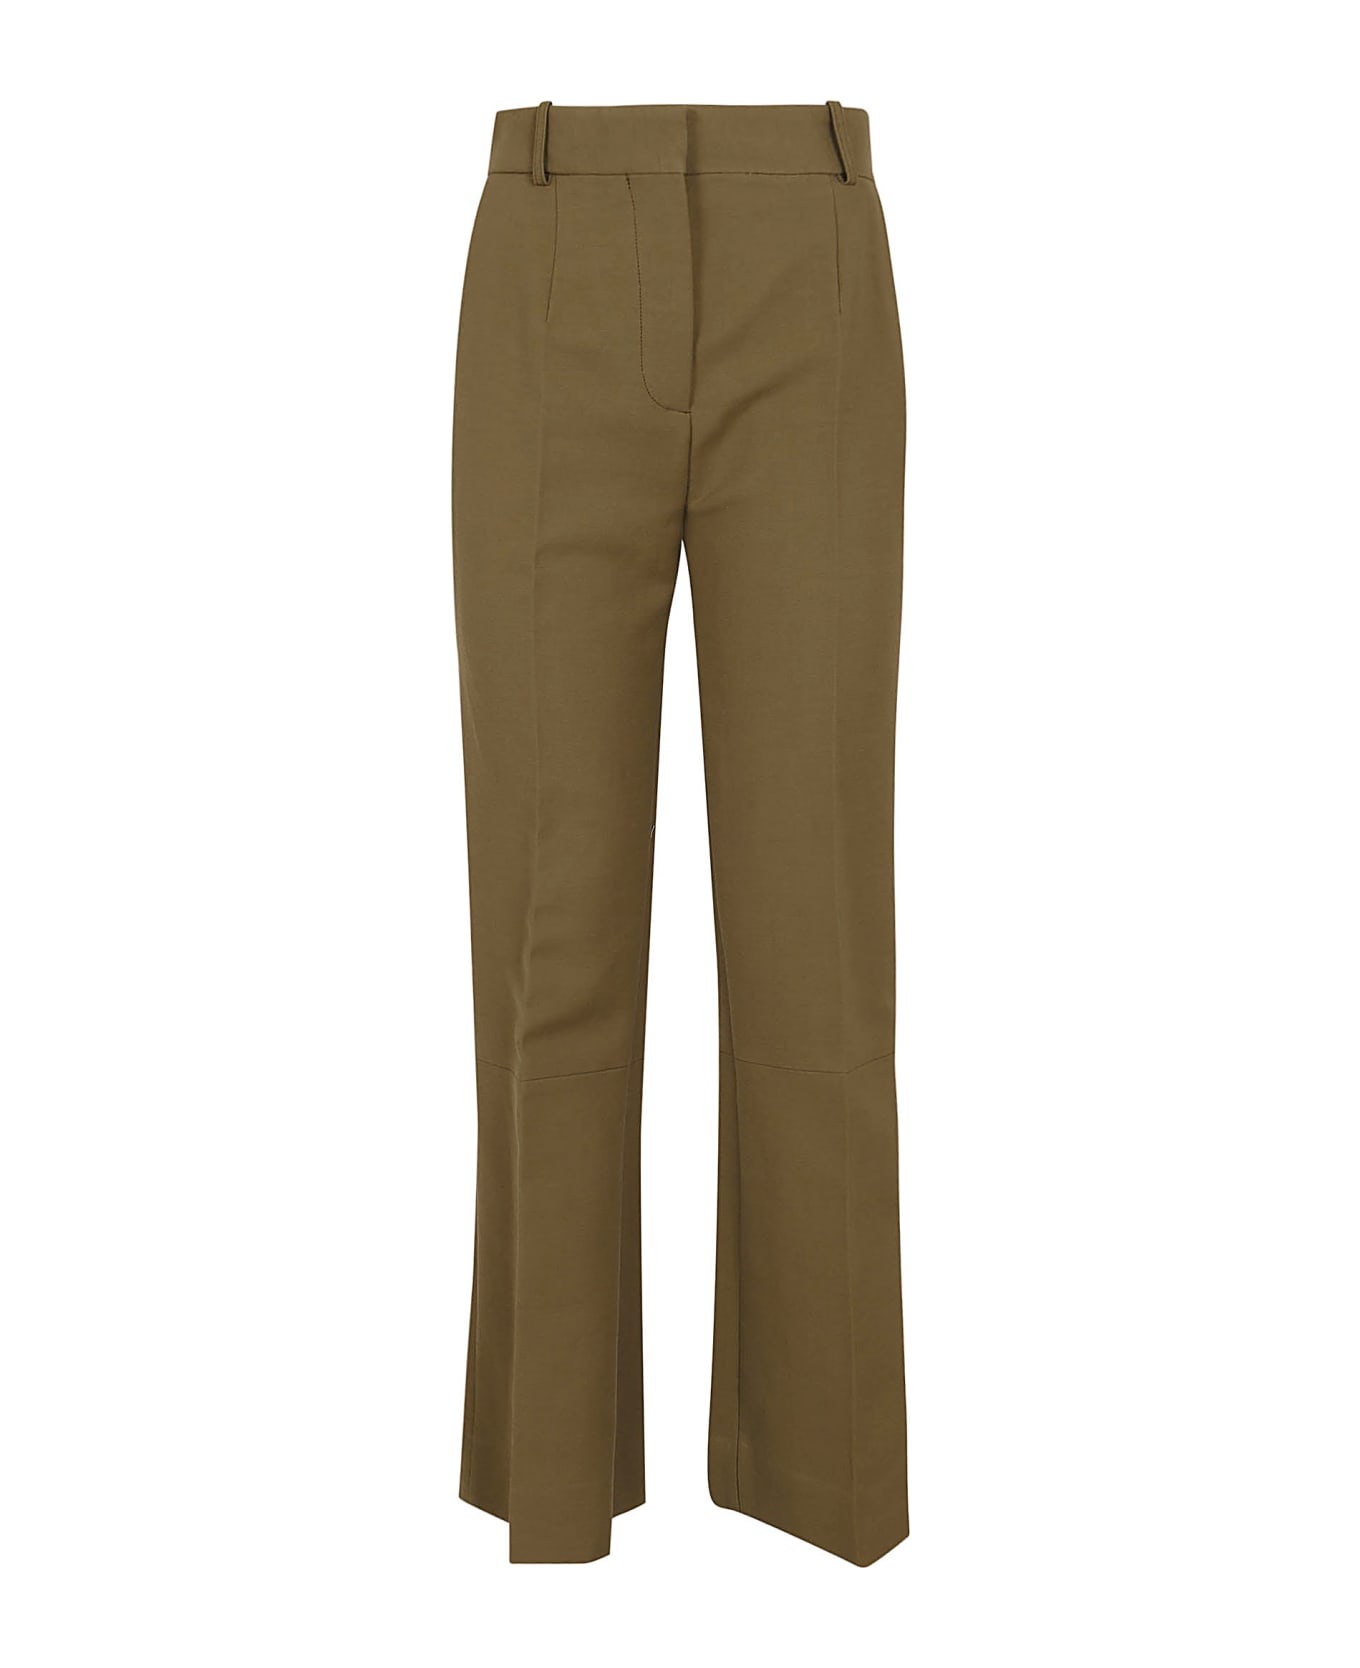 Victoria Beckham Cropped Kick Trousers - Seaweed ボトムス